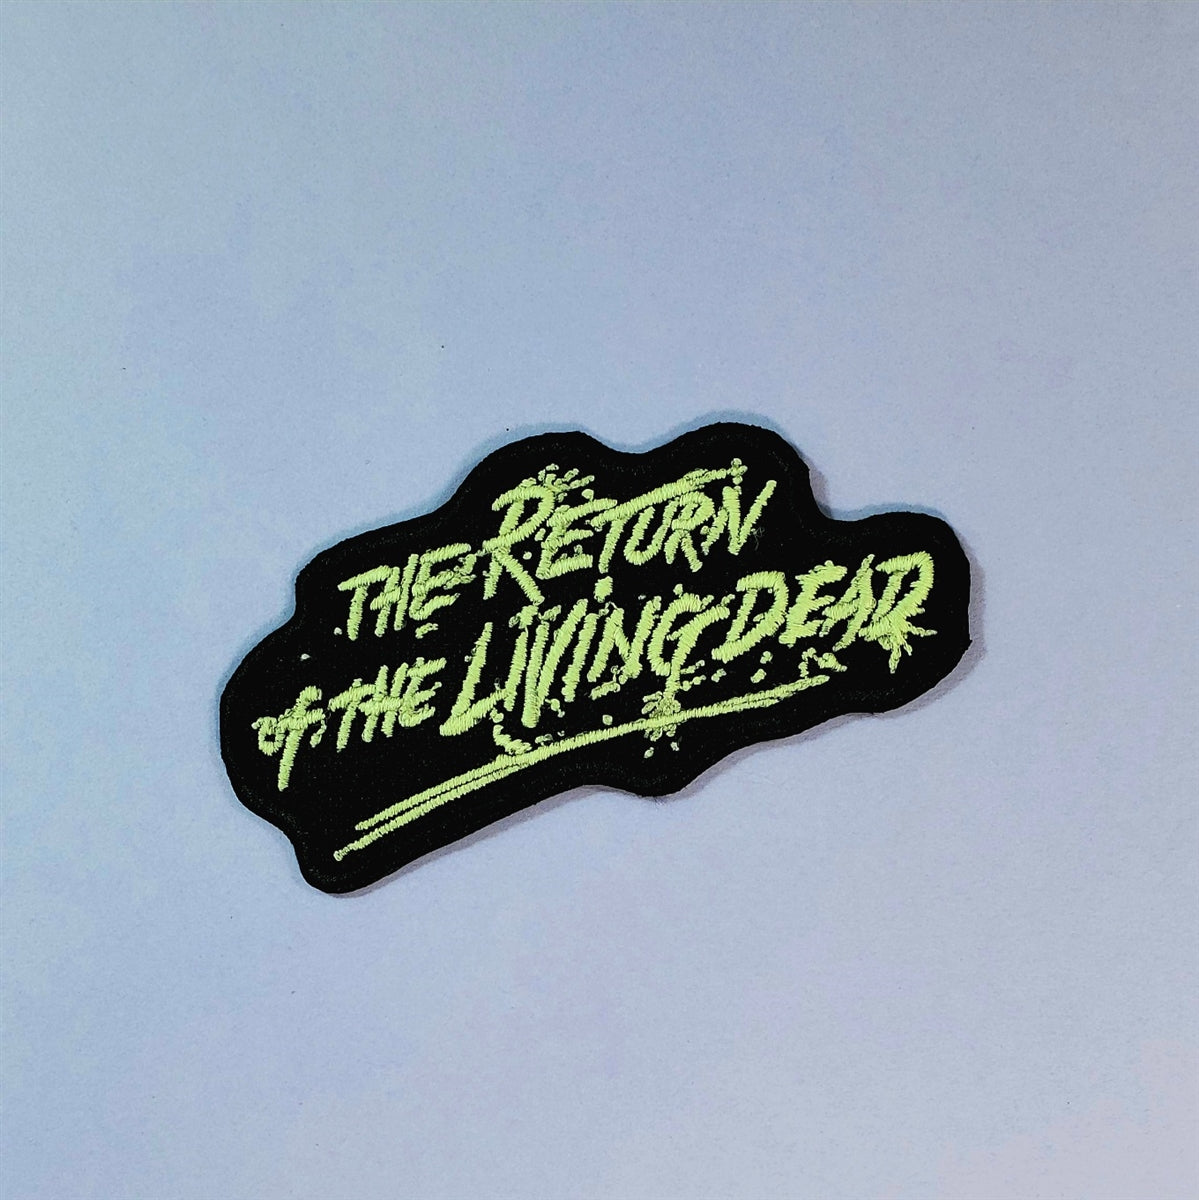 The Return of the Living Dead script logo glow-in-the-dark stitching on black background embroidered patch